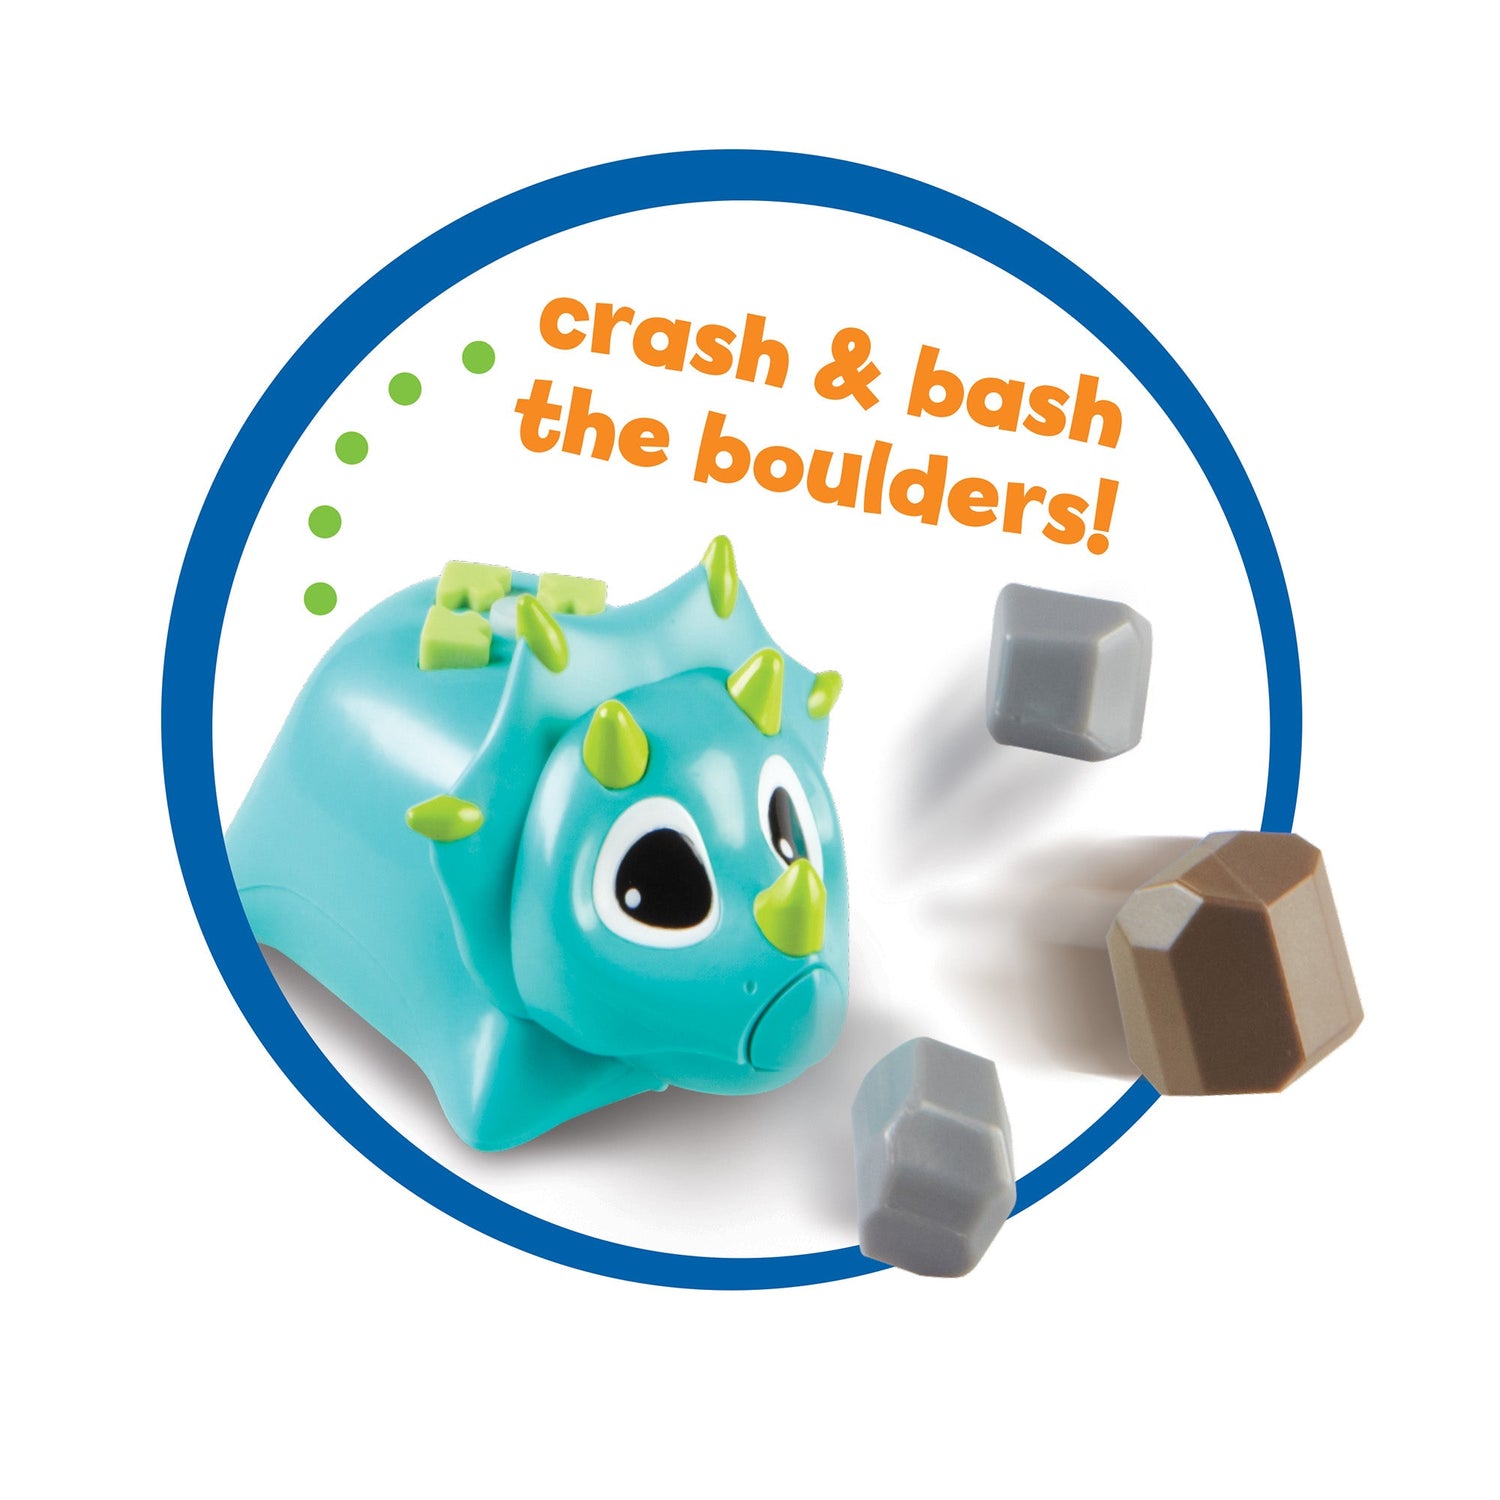 CODING CRITTERS® RUMBLE & BUMBLE by LEARNING RESOURCES - The Playful Collective